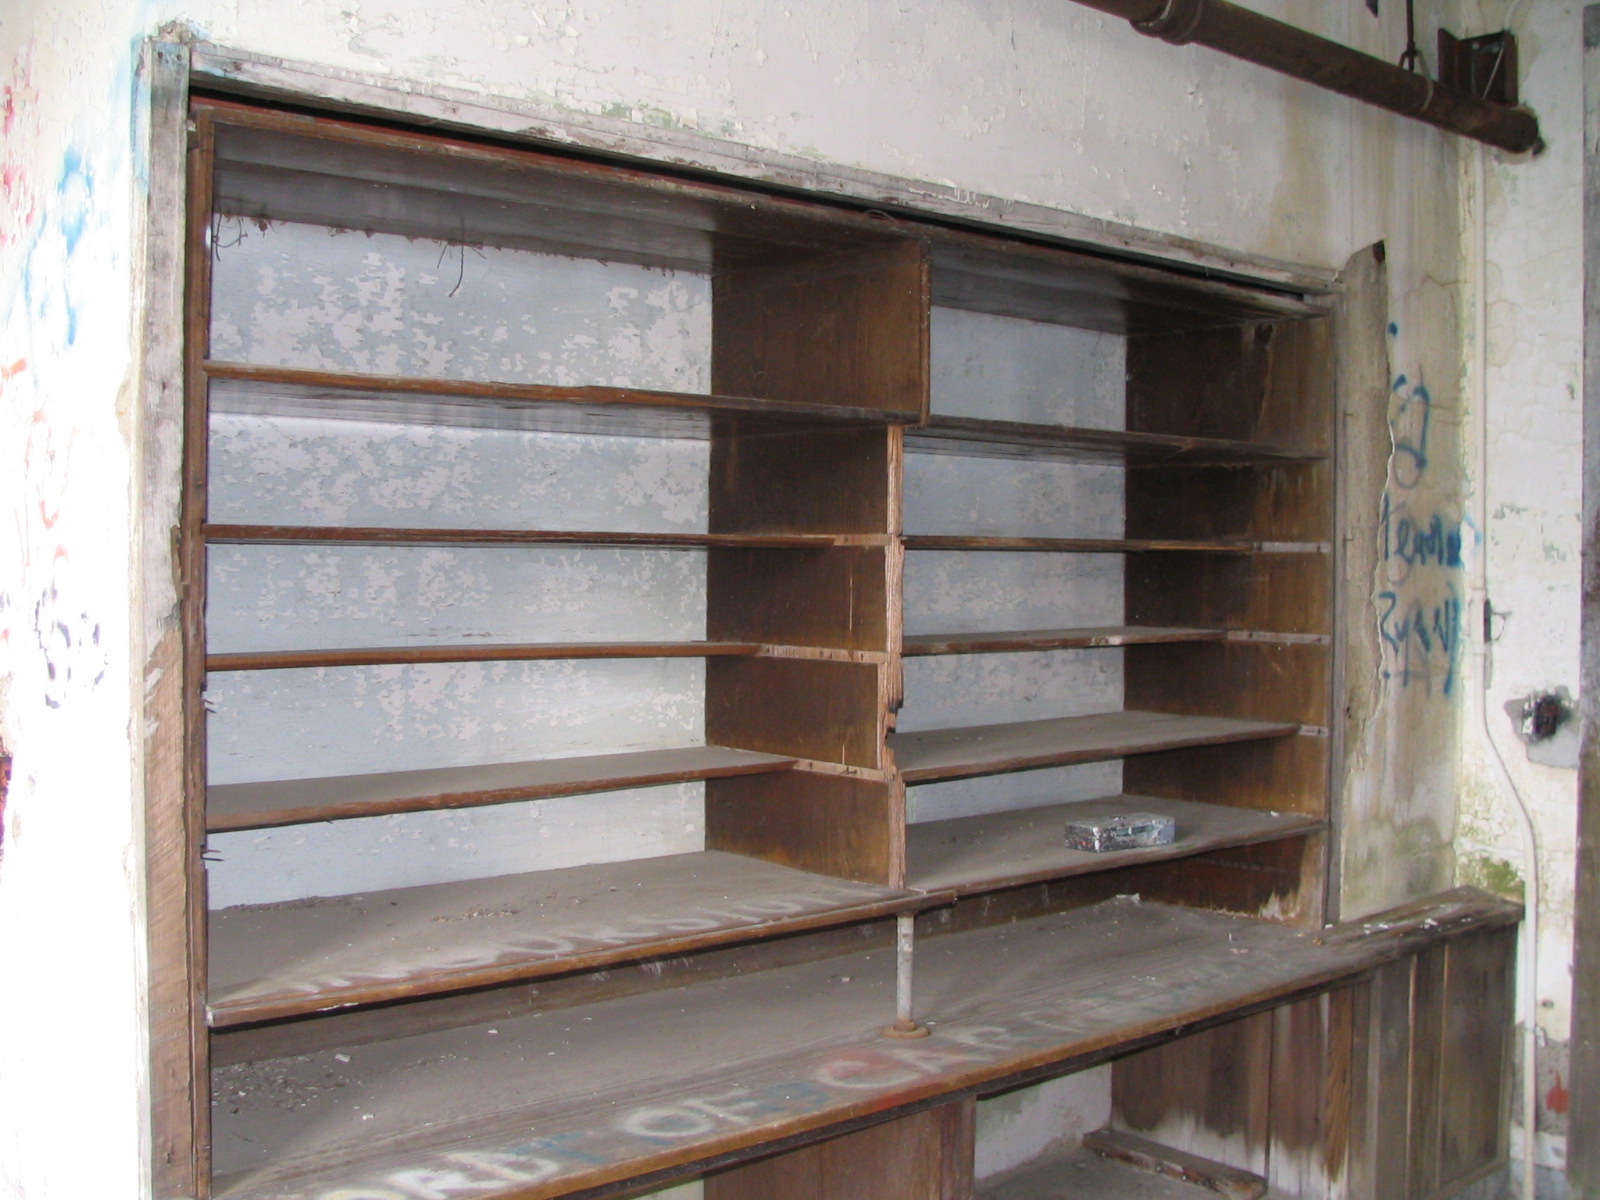 old shelves with rusted paint, in an empty room